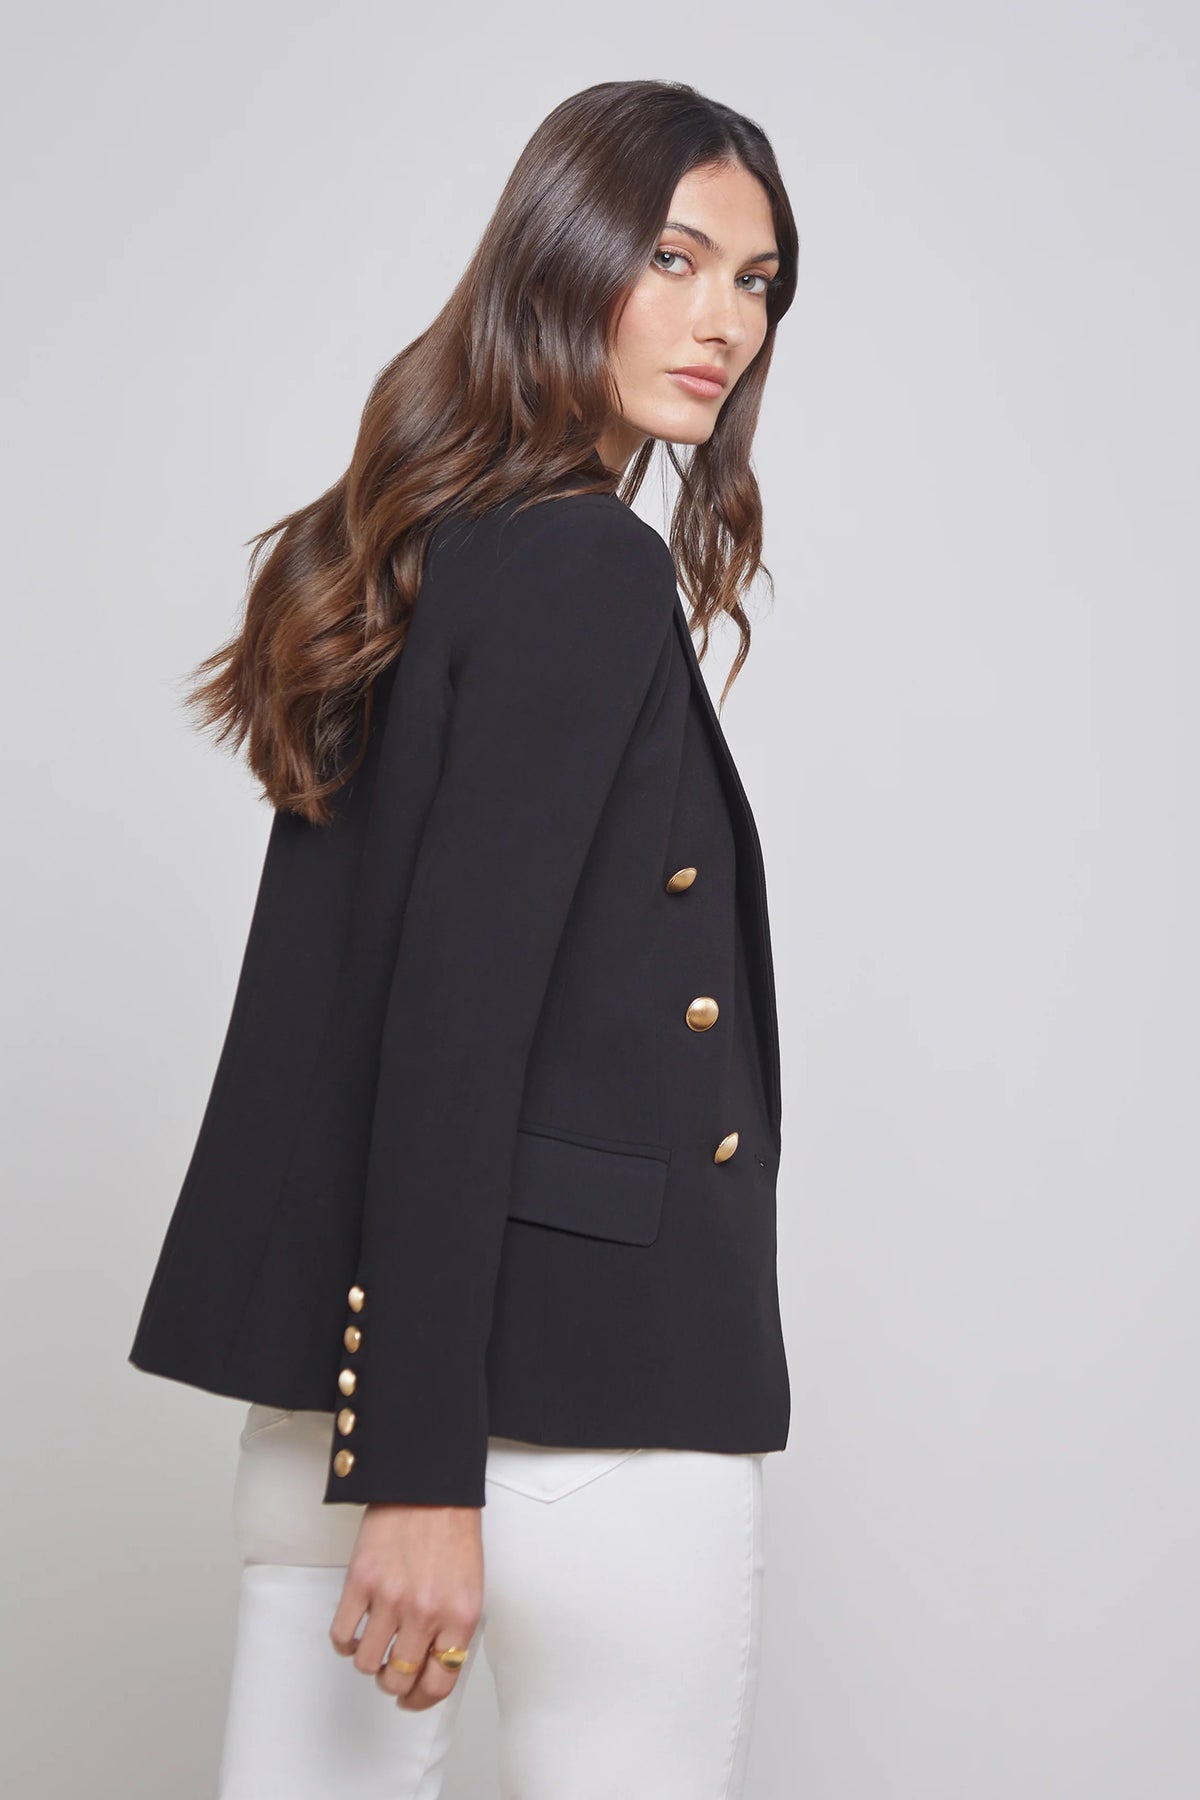 L'Agence Kenzie Double Breasted Blazer